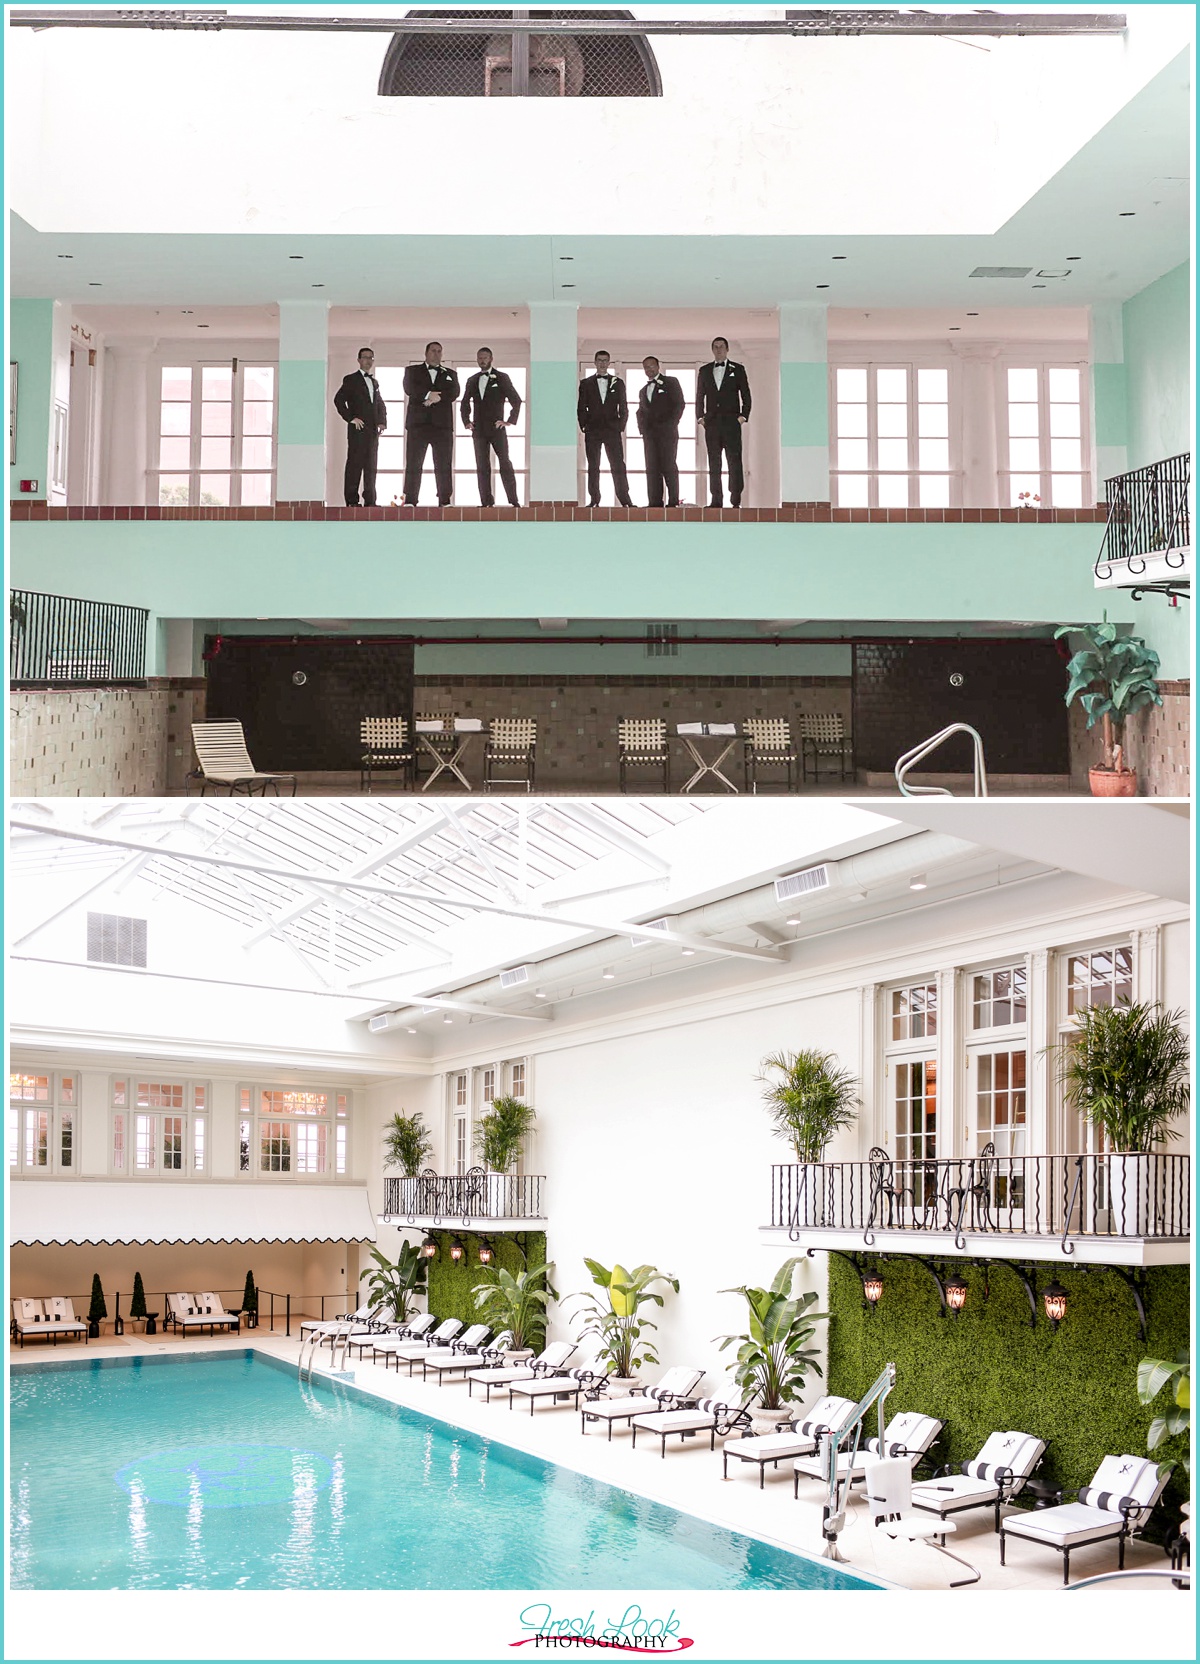 Cavalier Hotel before and after renovation